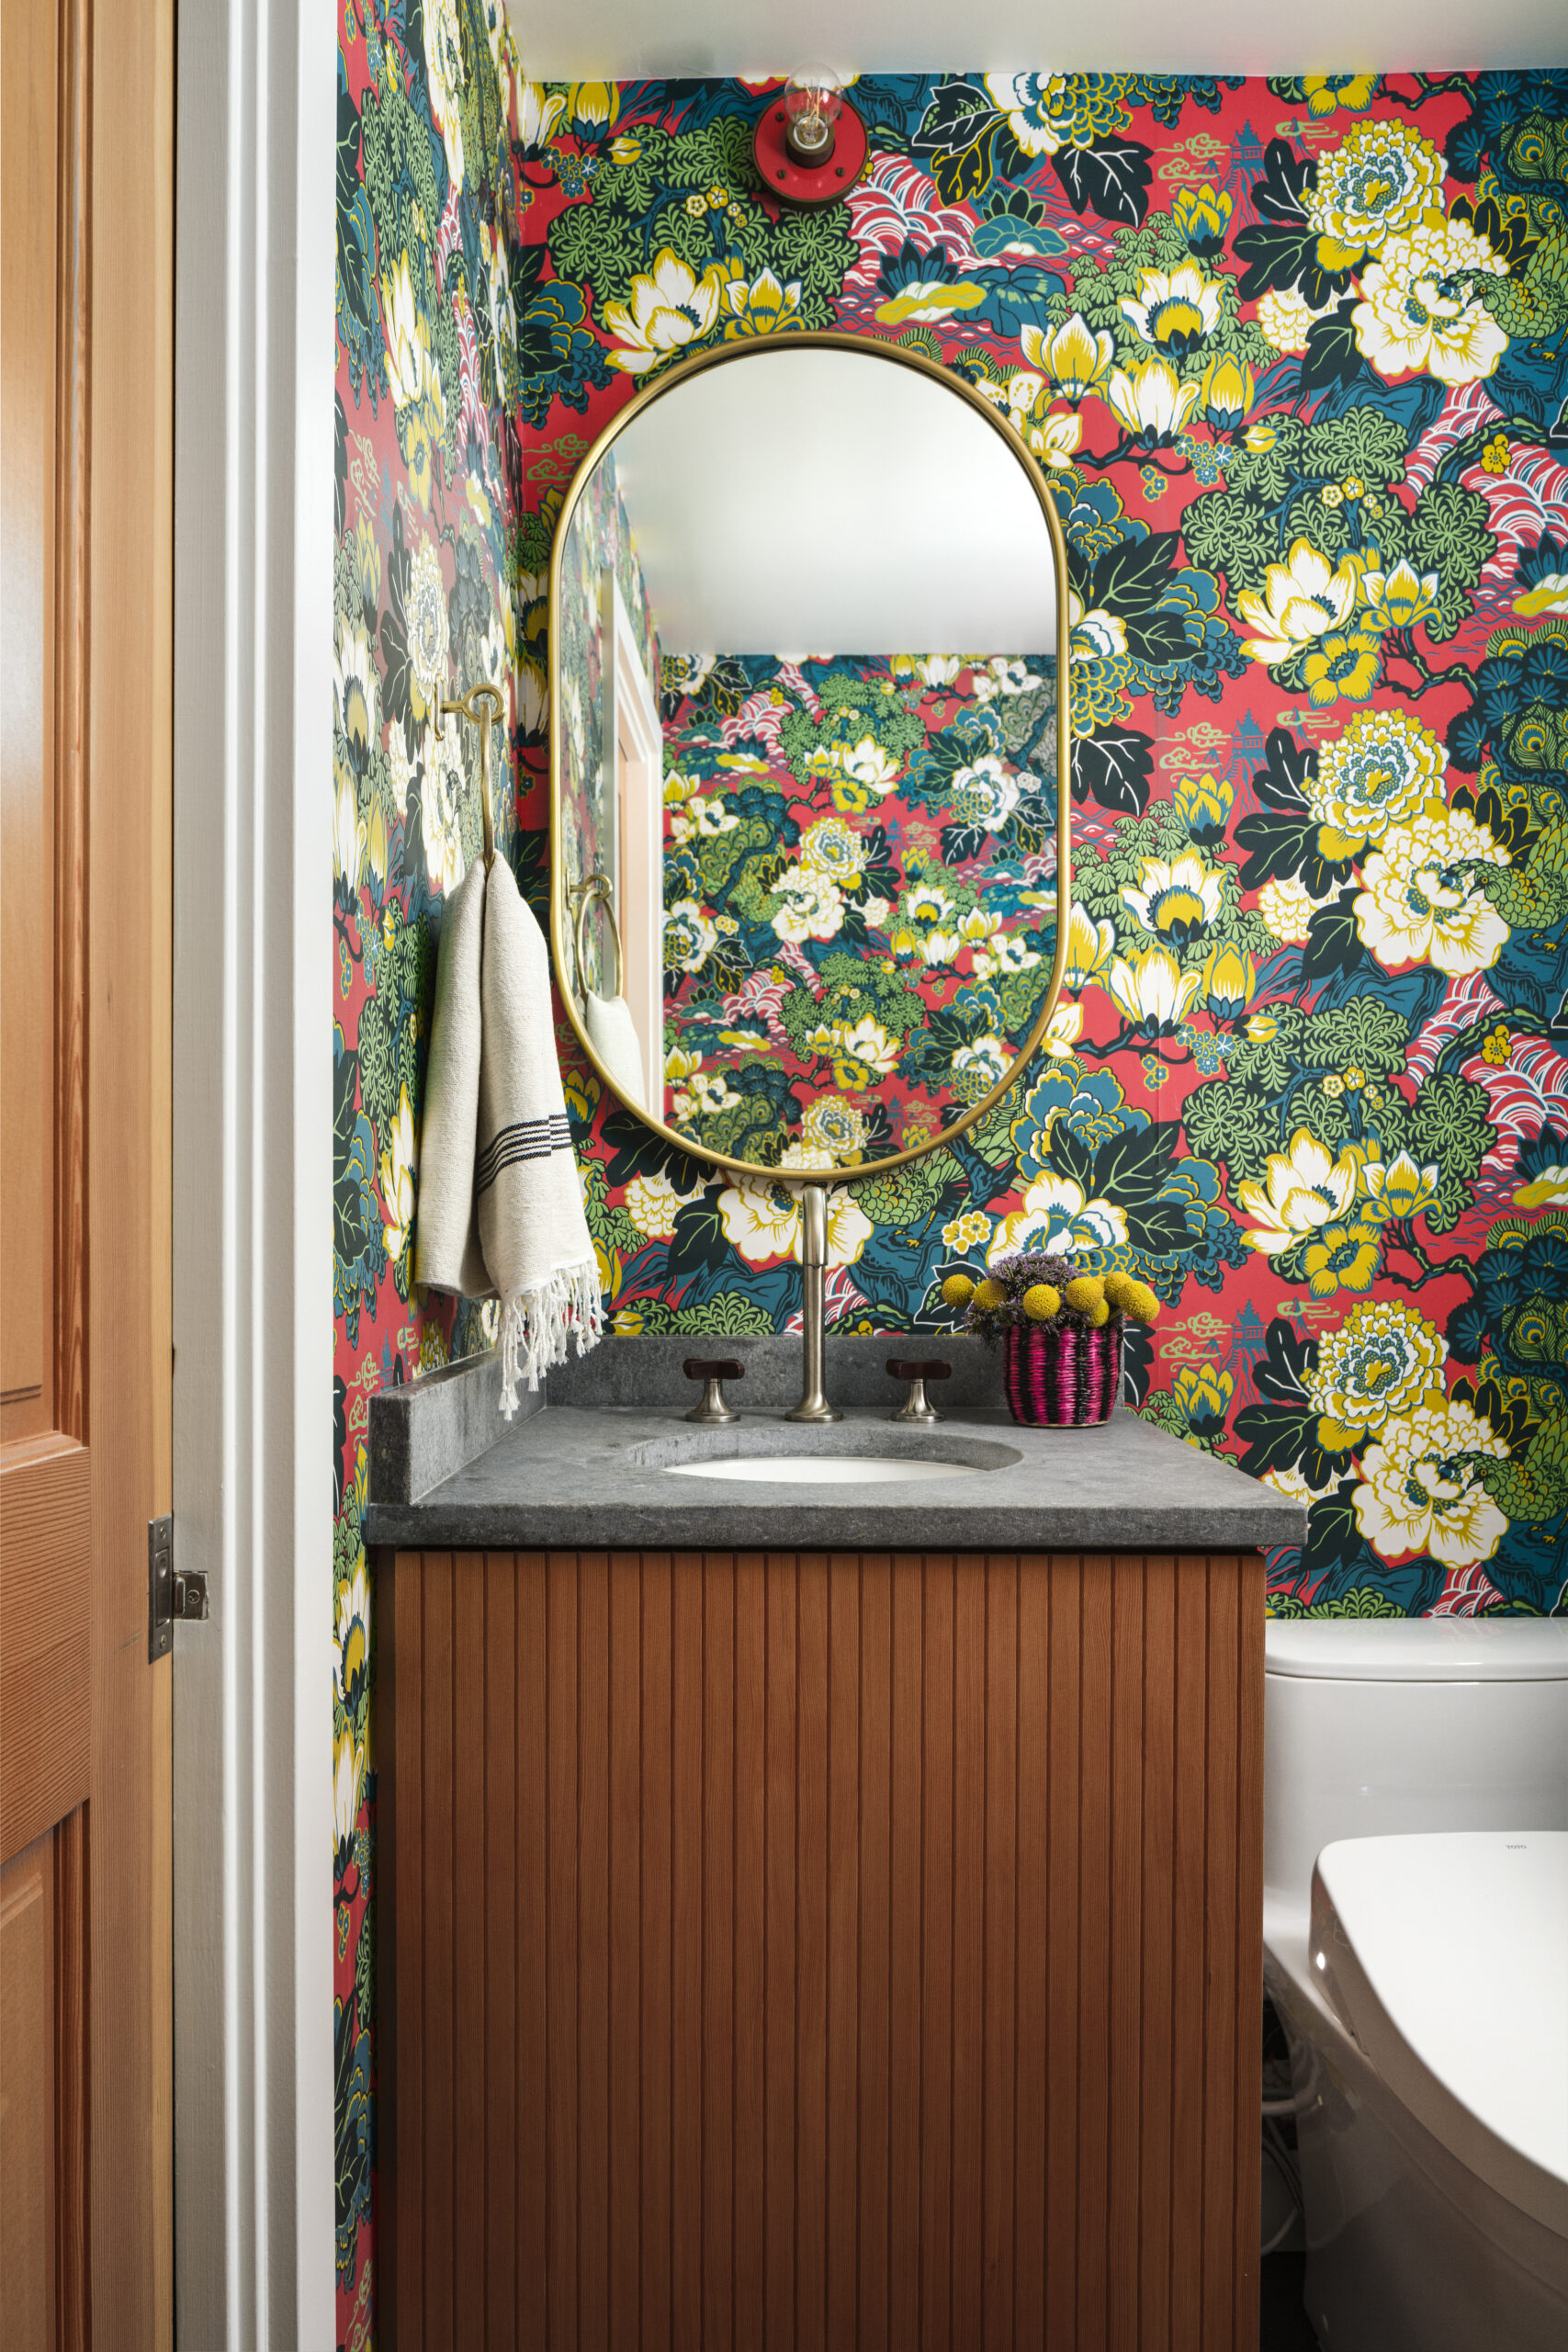 In the bathroom, heavily-patterned, color-saturated wallpaper is a wonderfully bold choice. Wood cabinets and a stone countertop anchor the look in a natural vein. (Christoper Stark)